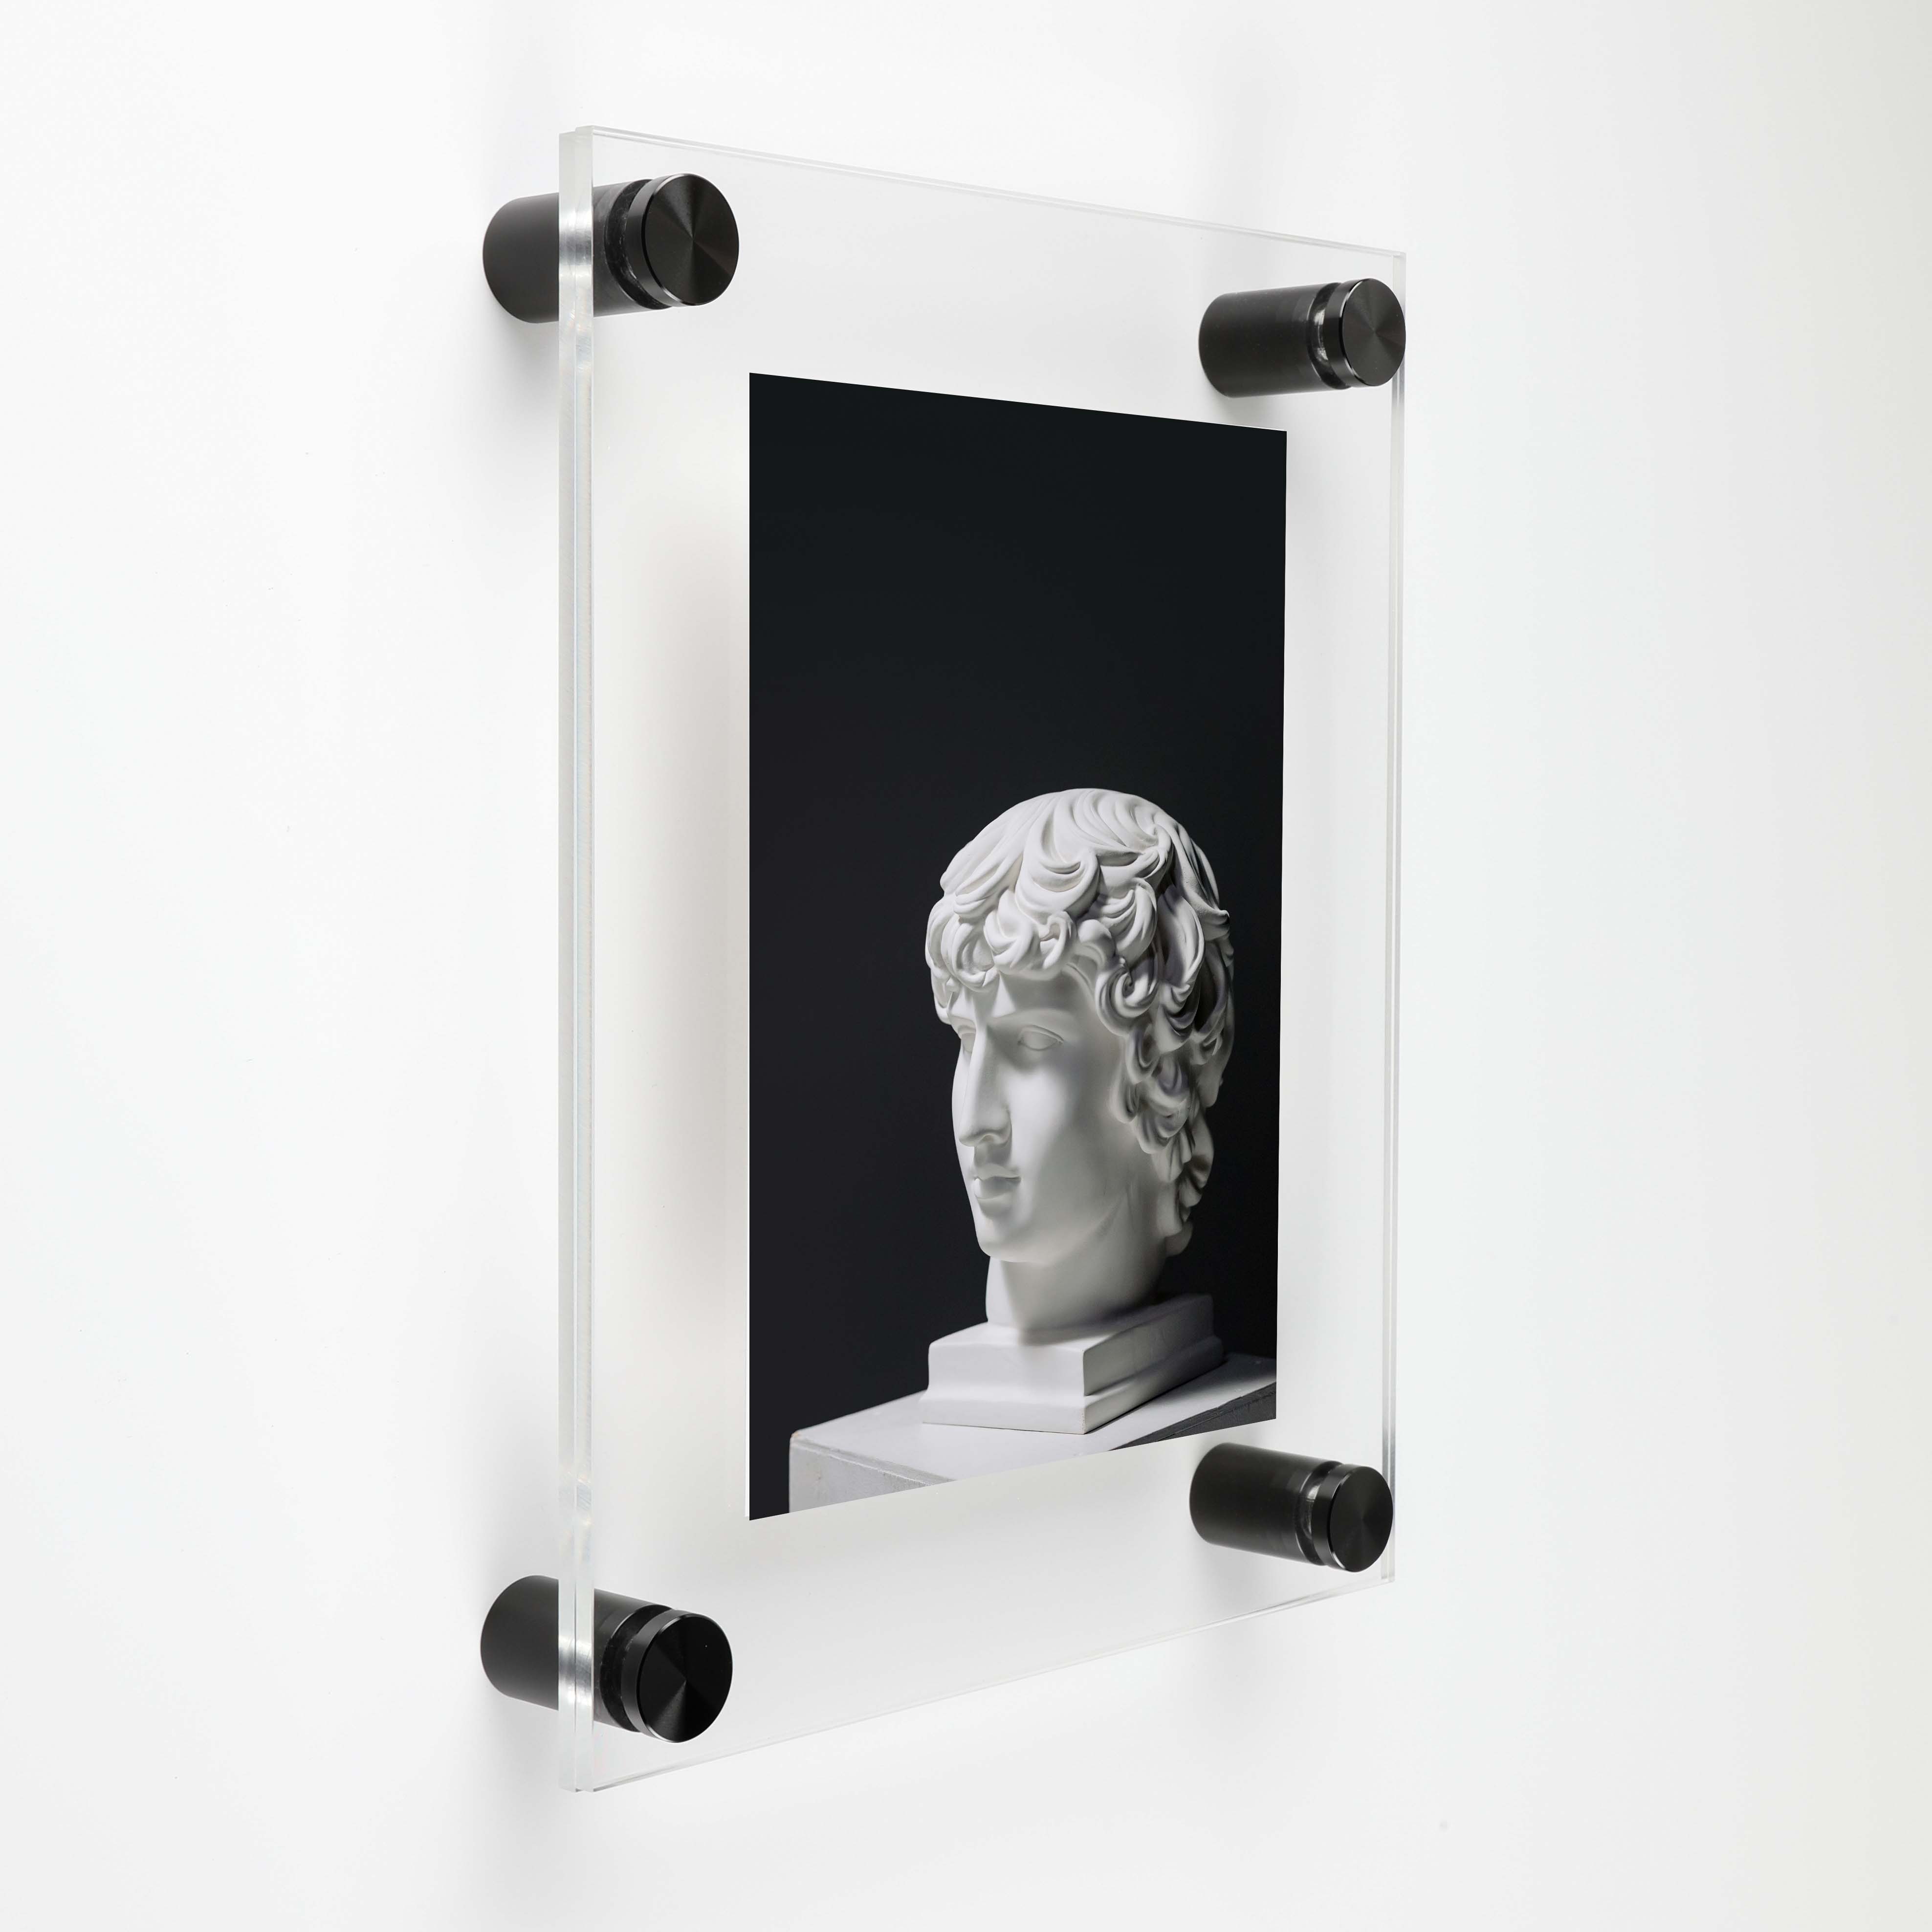 (2) 13-1/2'' x 16-1/2'' Clear Acrylics , Pre-Drilled With Polished Edges (Thick 1/8'' each), Wall Frame with (4) 5/8'' x 1'' Black Anodized Aluminum Standoffs includes Screws and Anchors